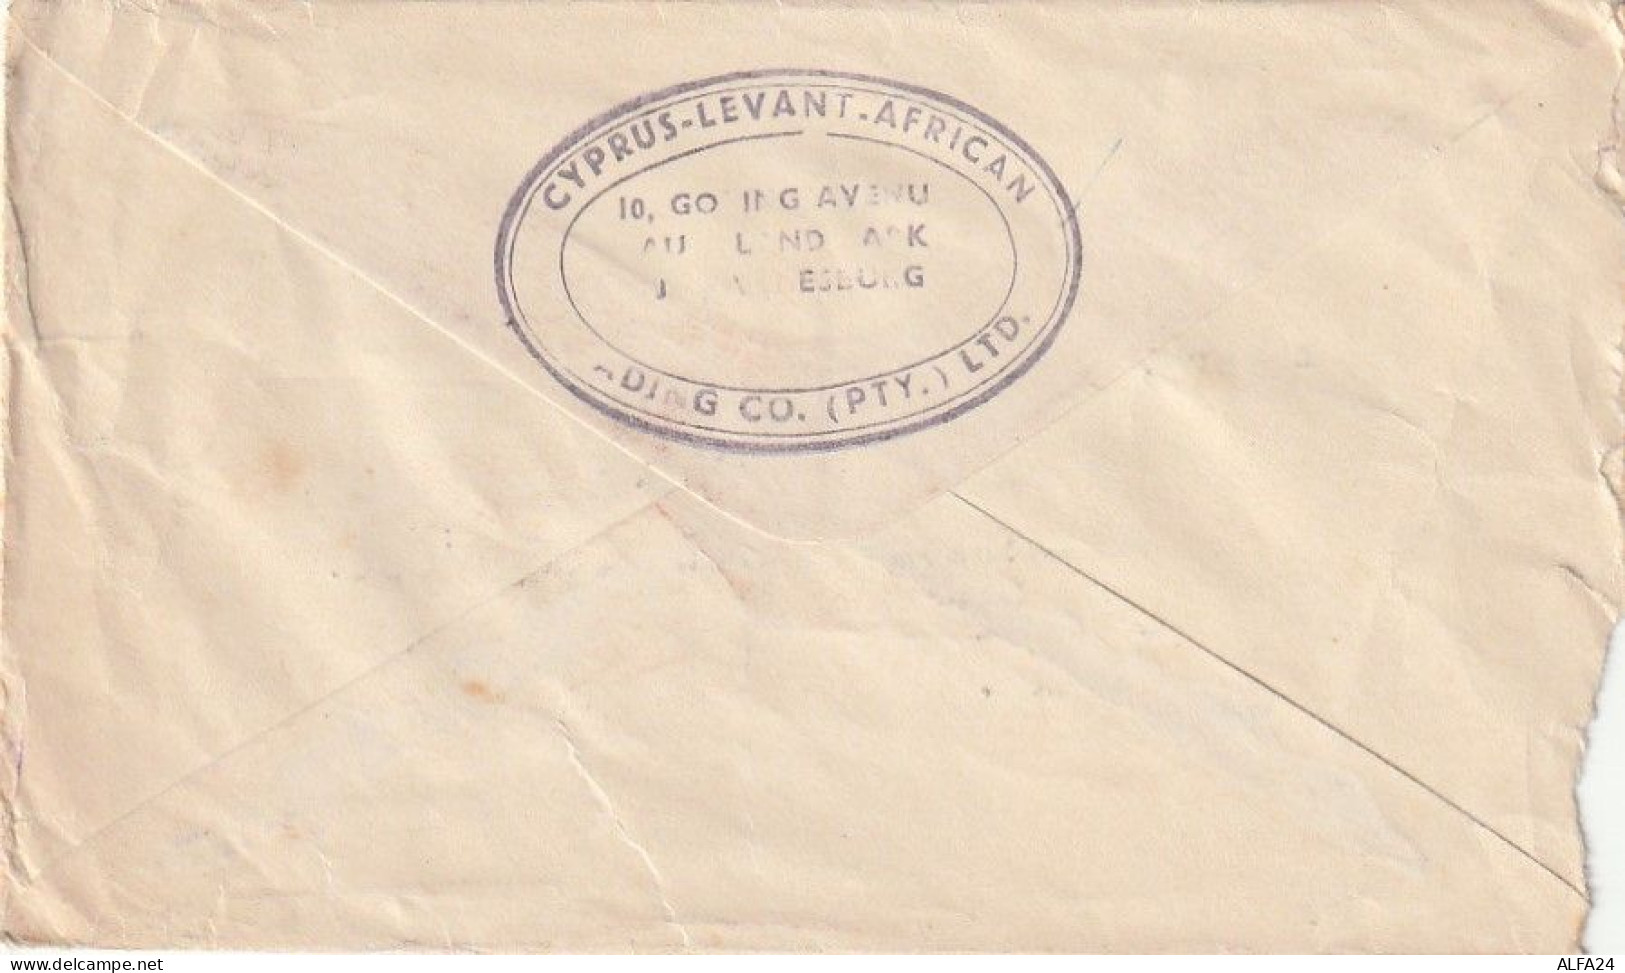 LETTERA 1947 SOUTH AFRICA TIMBRO JOHANNESBURG (XT3451 - Covers & Documents